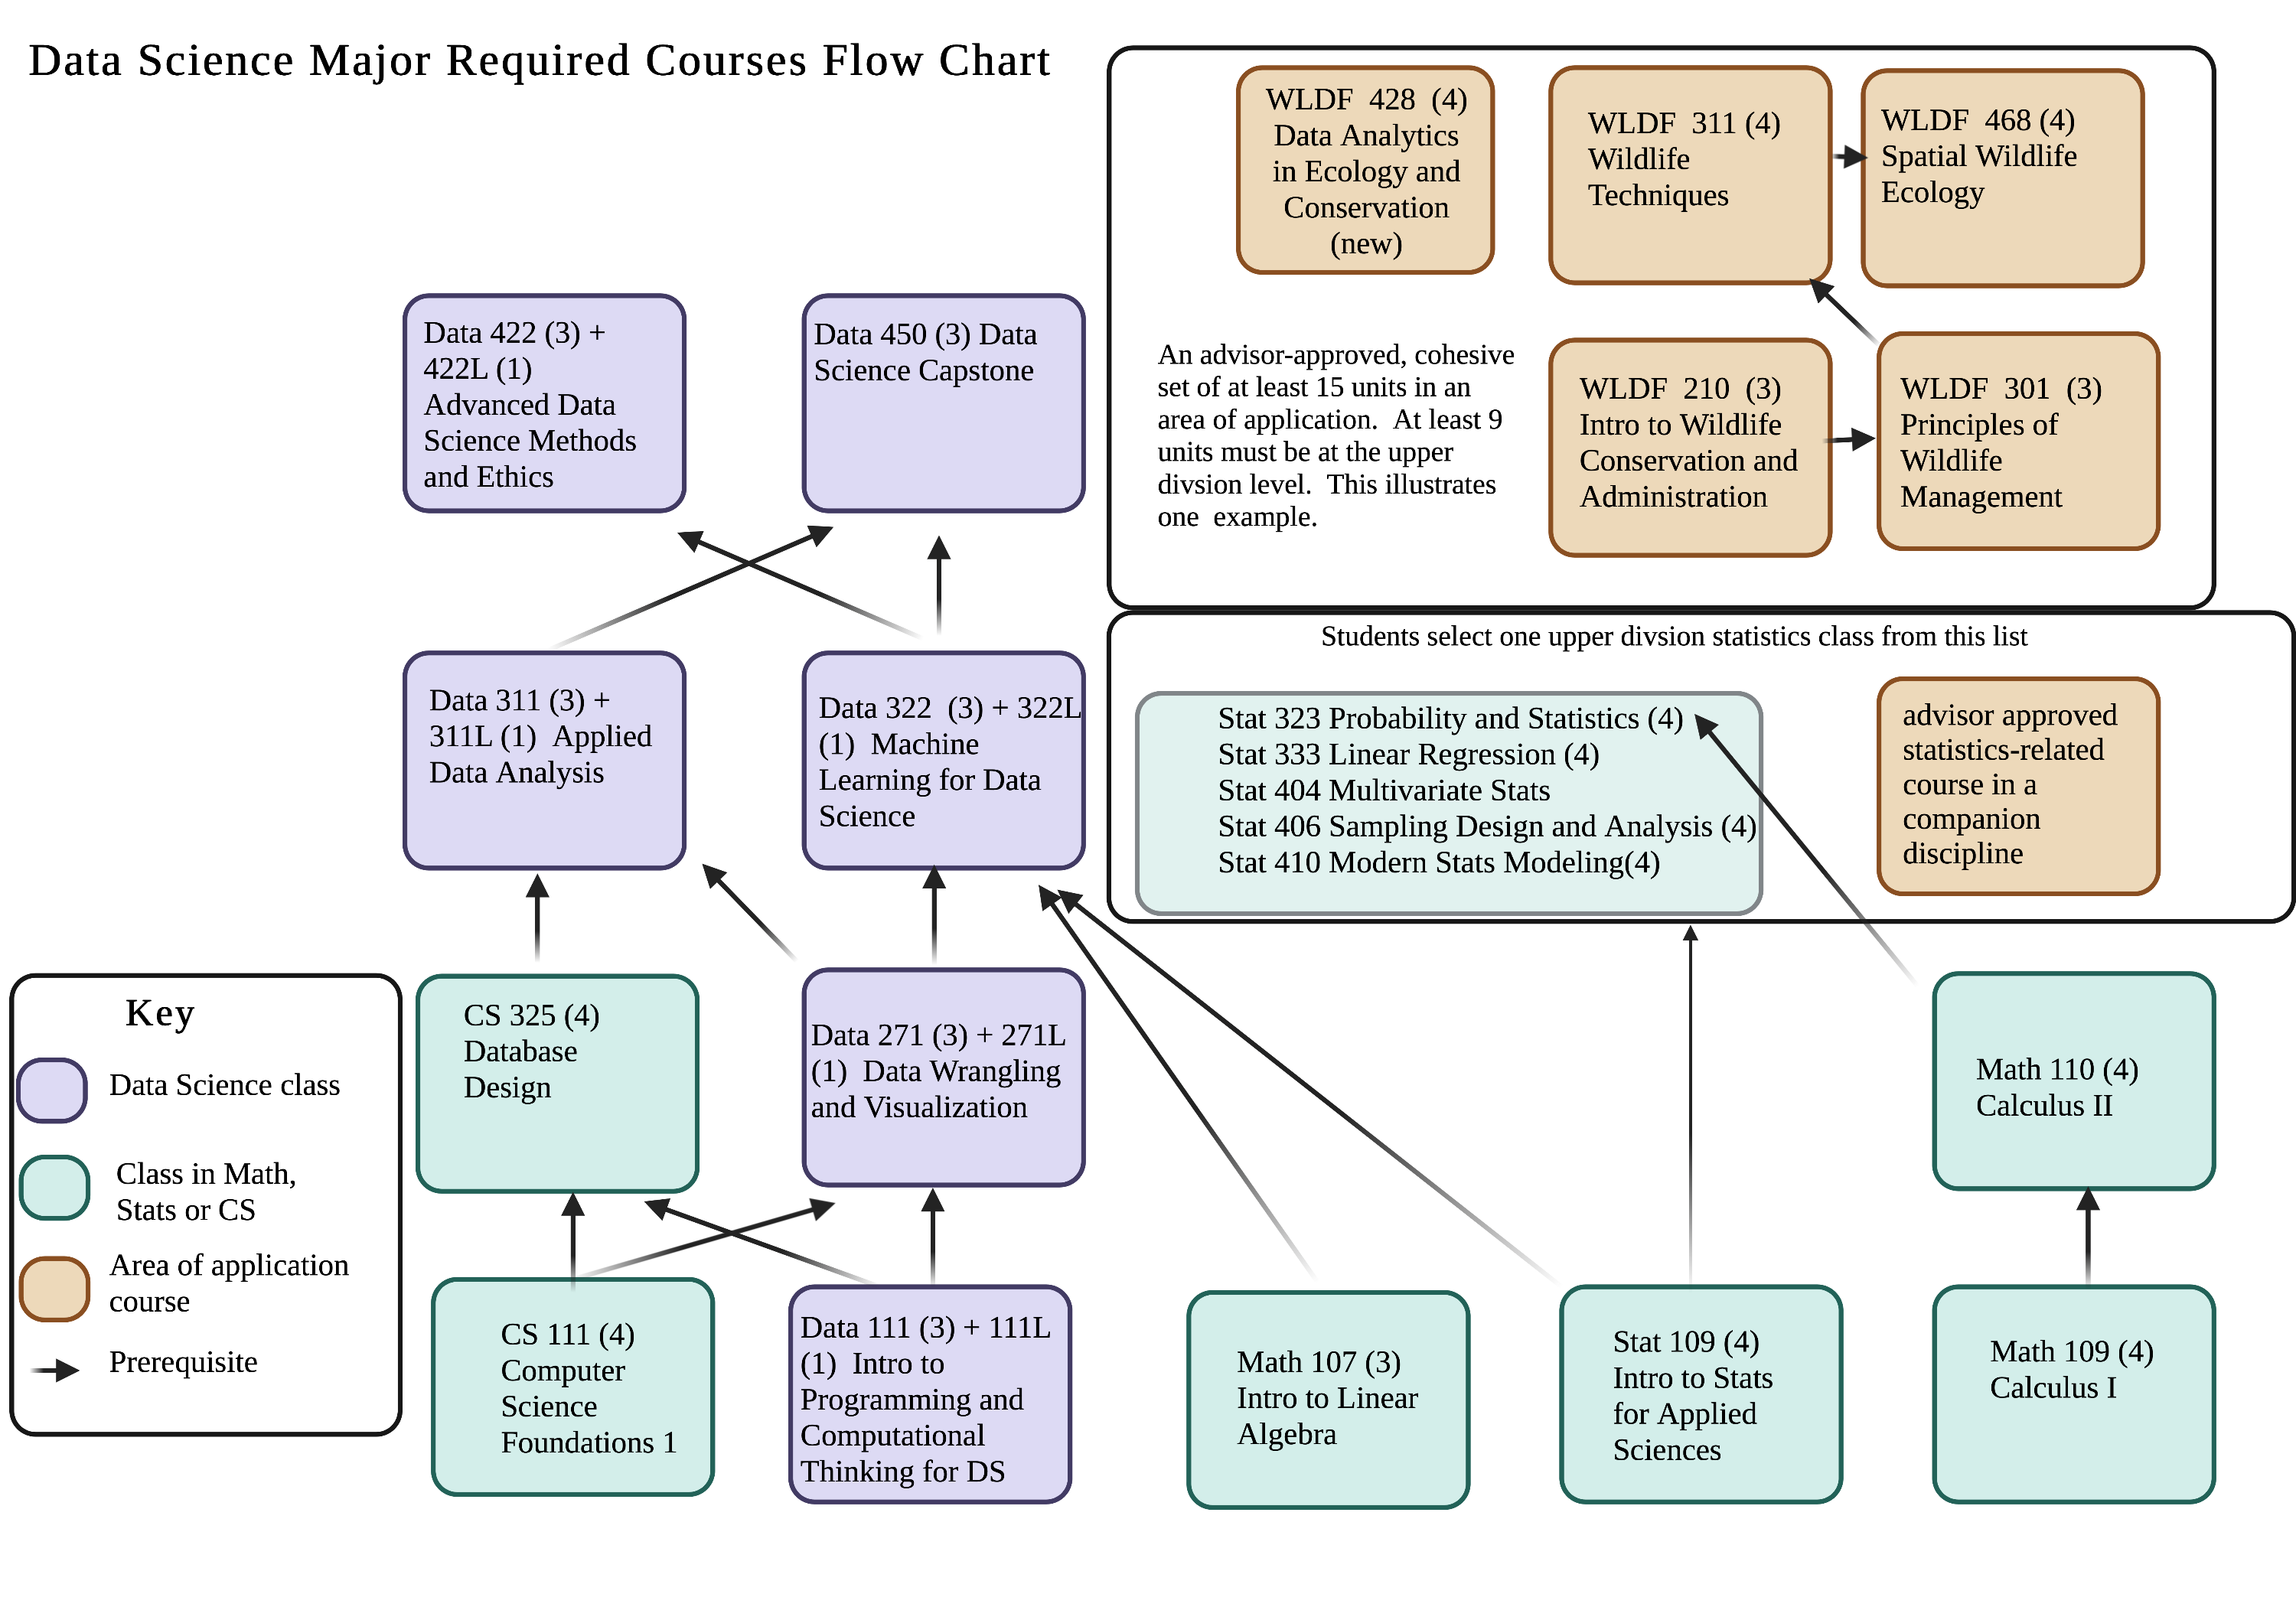 Flow Chart of Required Major Courses